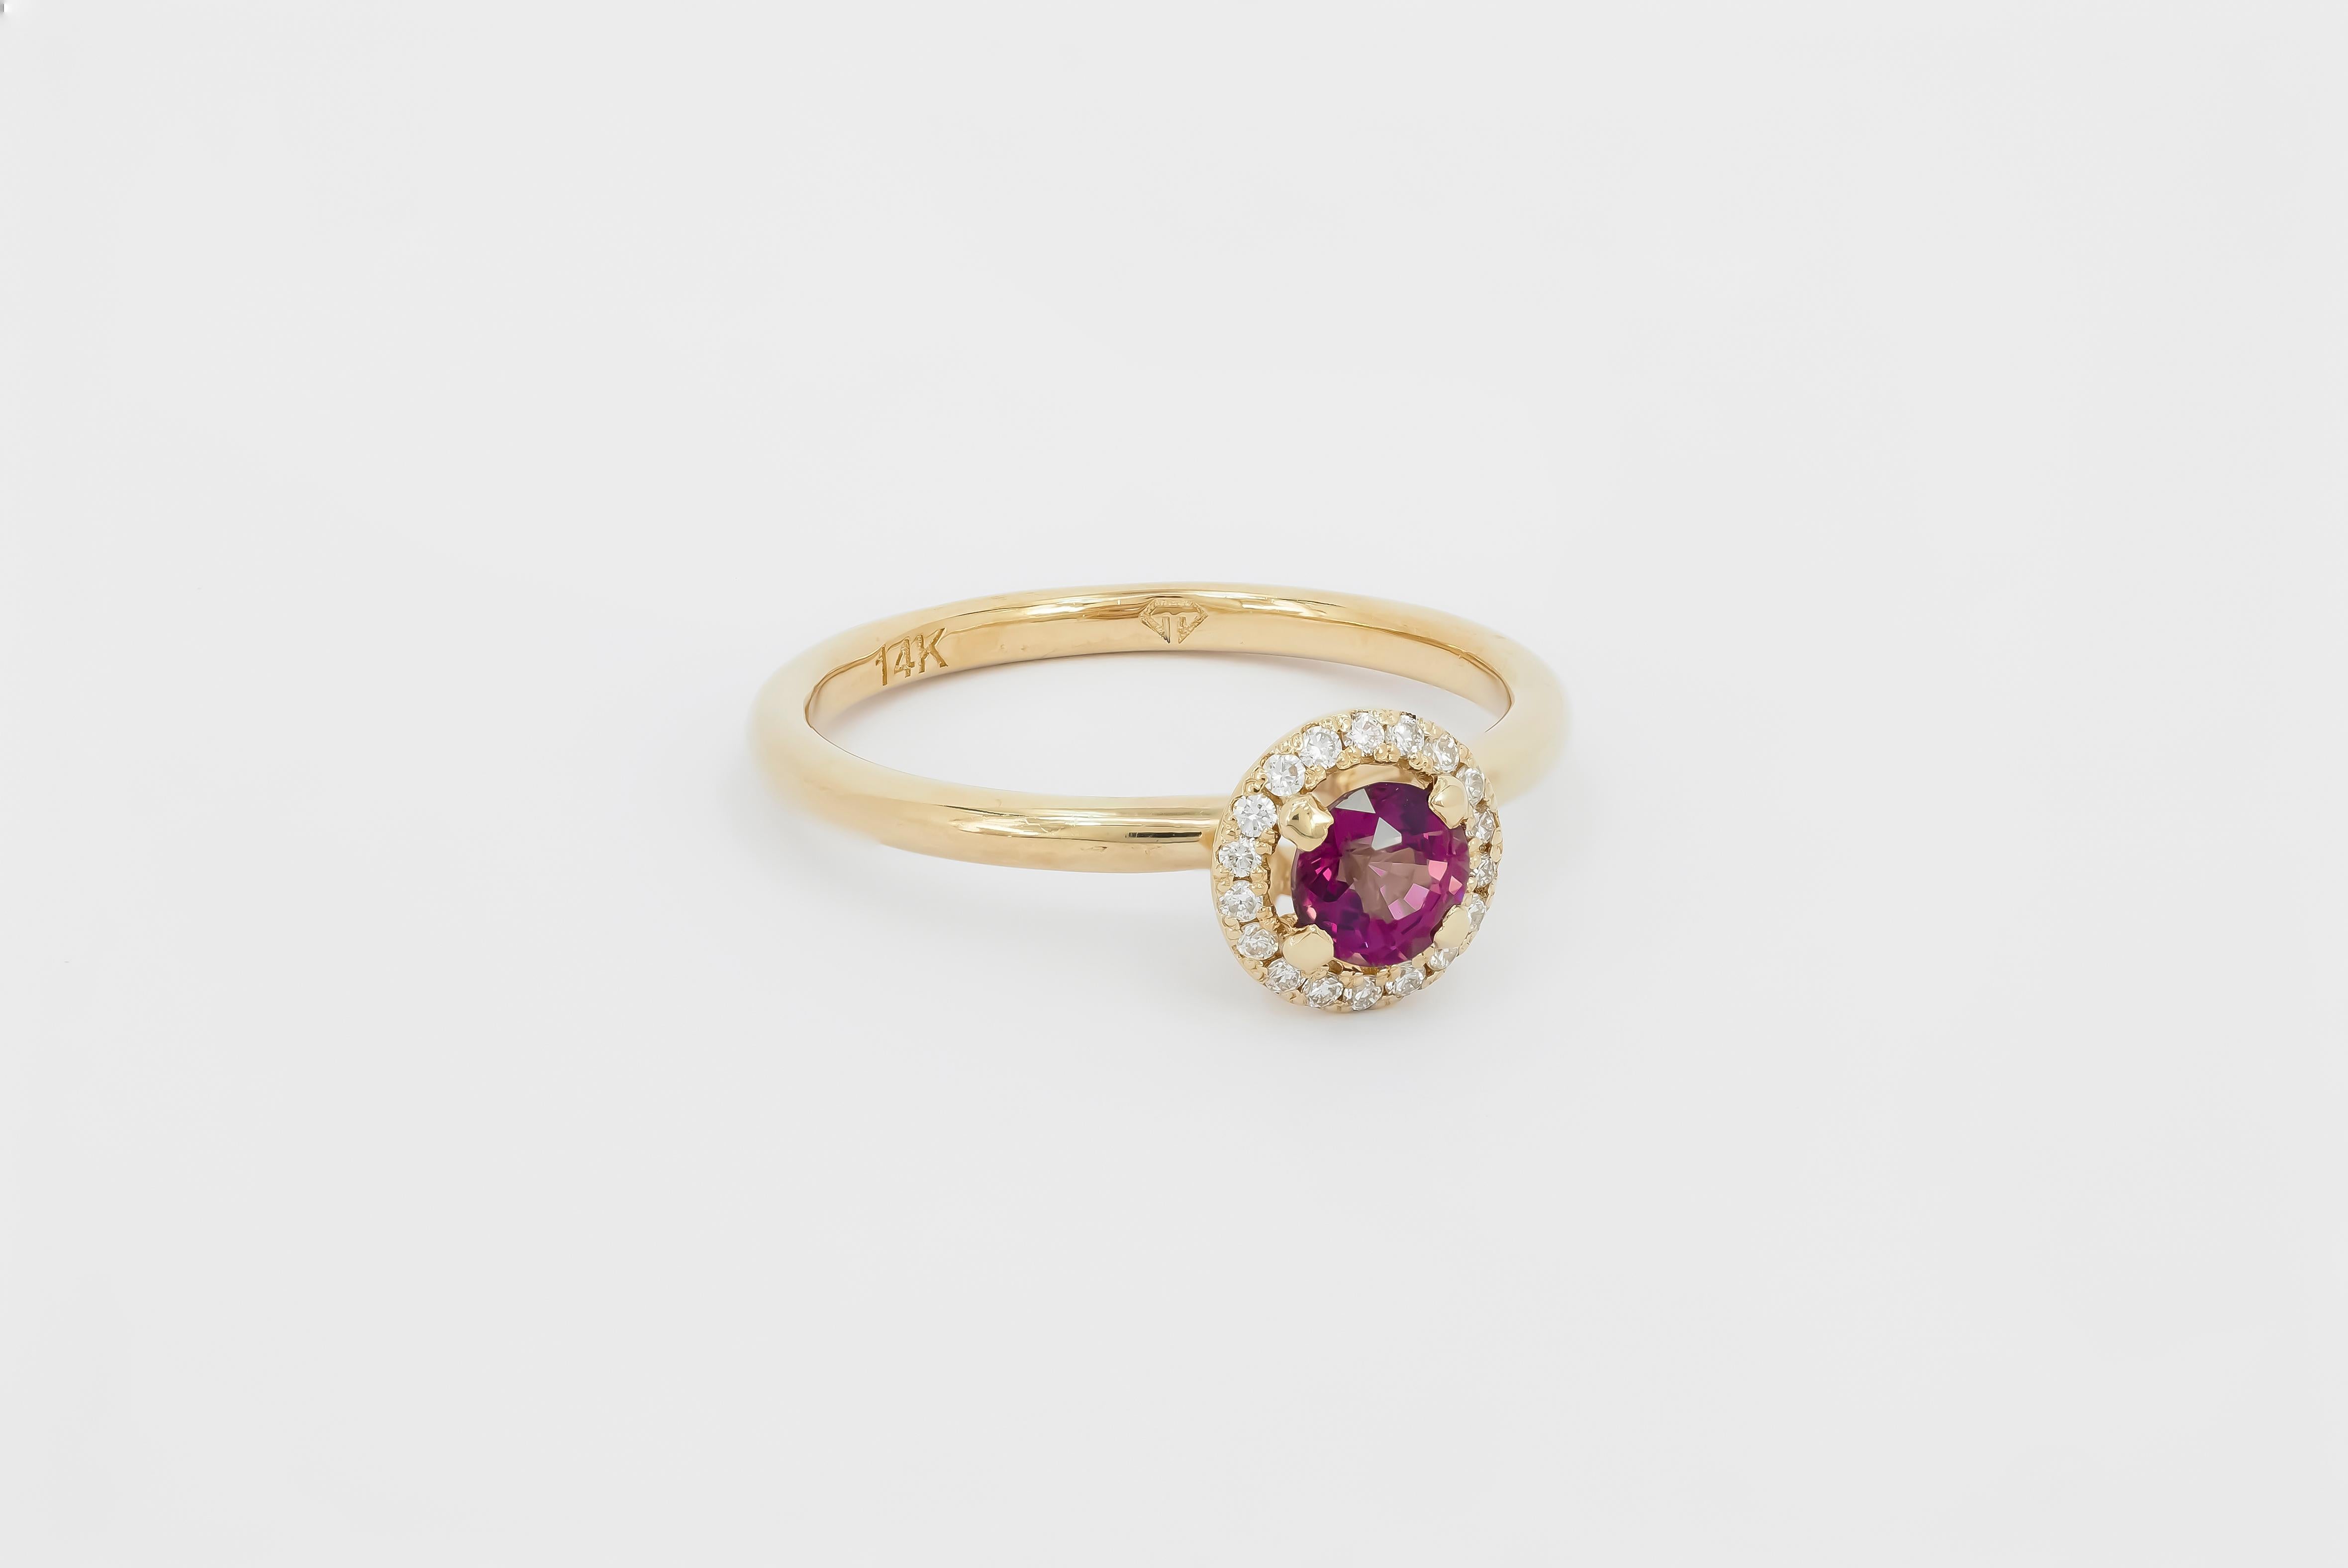 For Sale:  14k Solid Gold Ring with Natural Spinel and Diamonds 10